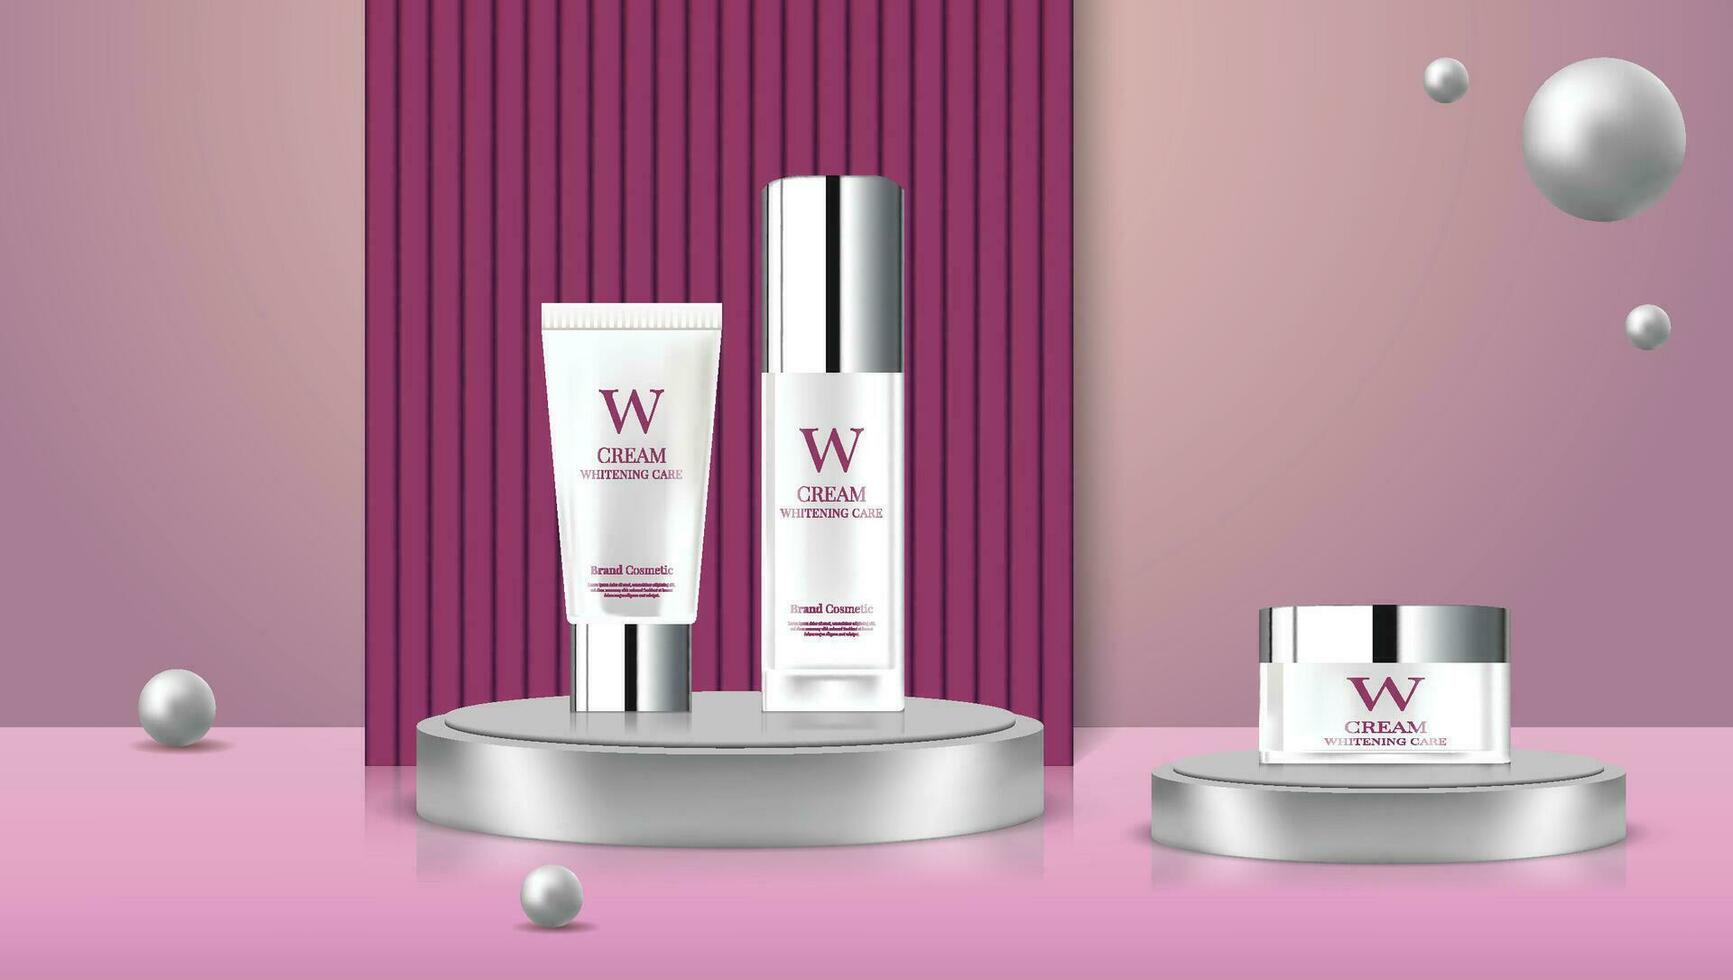 A set of white bottles skin care products advertised on podium in minimalist style vector